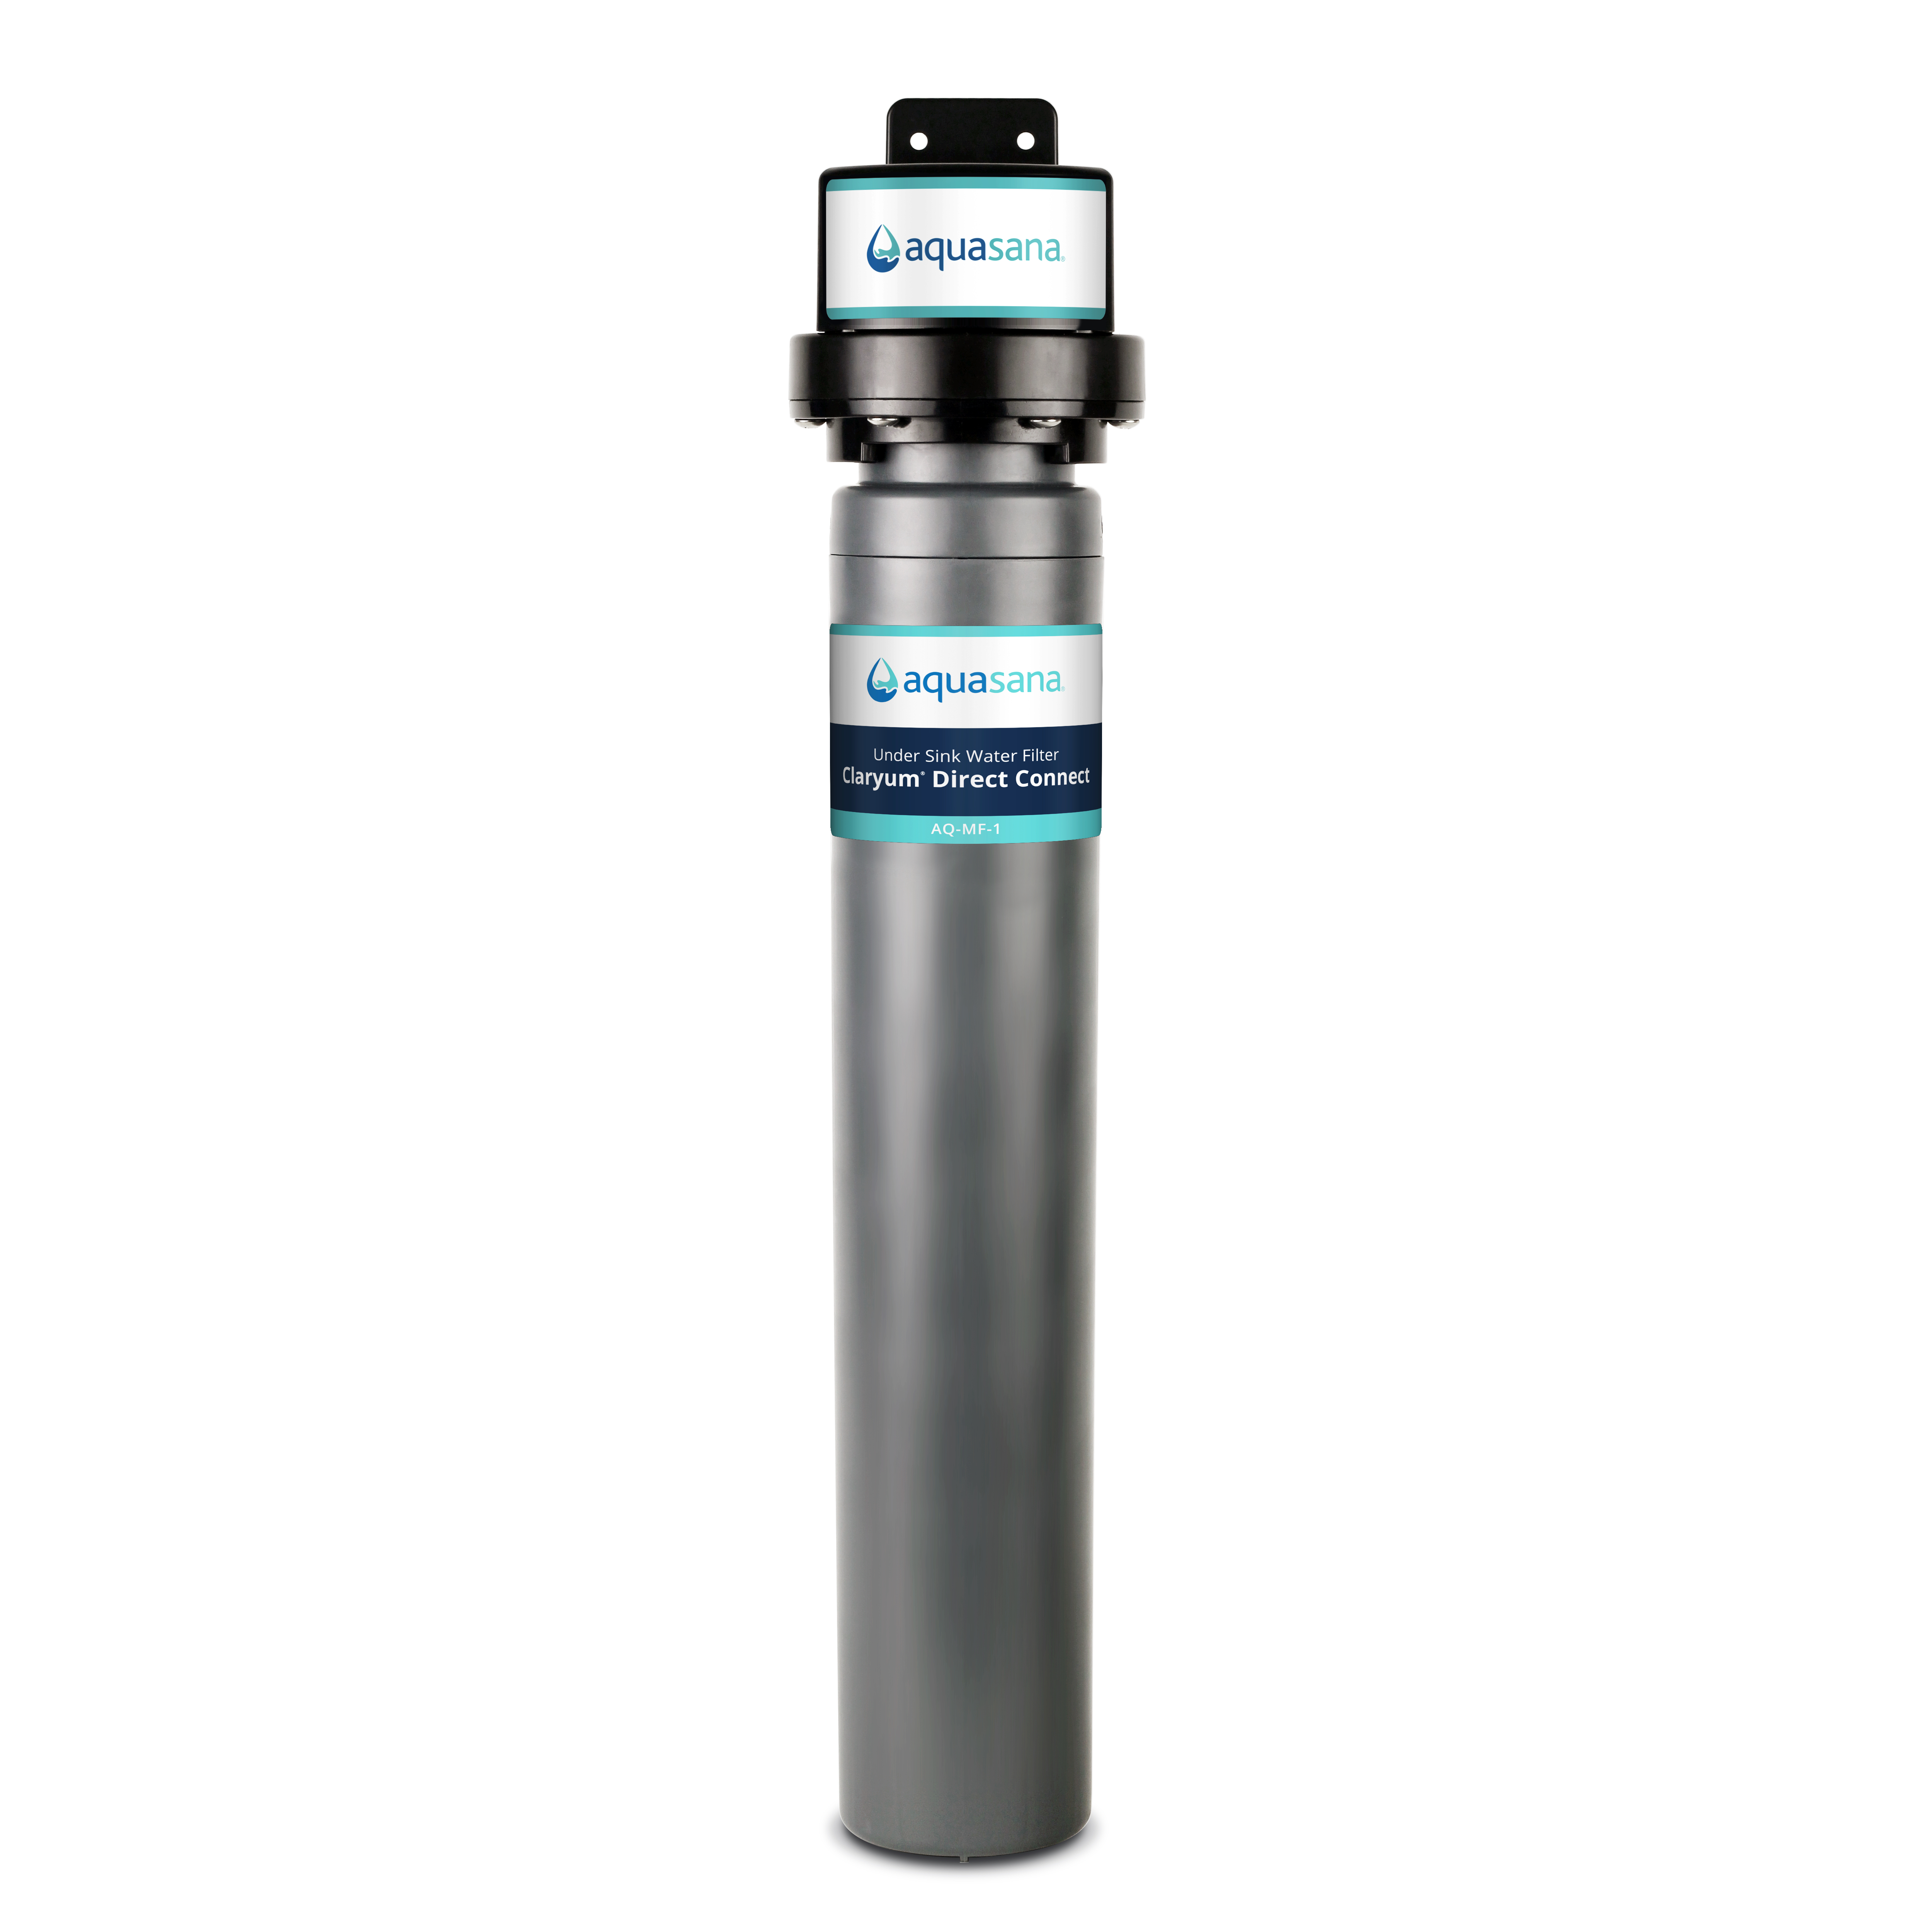 Claryum Direct Connect removes up to 99% of 77 contaminants from water.